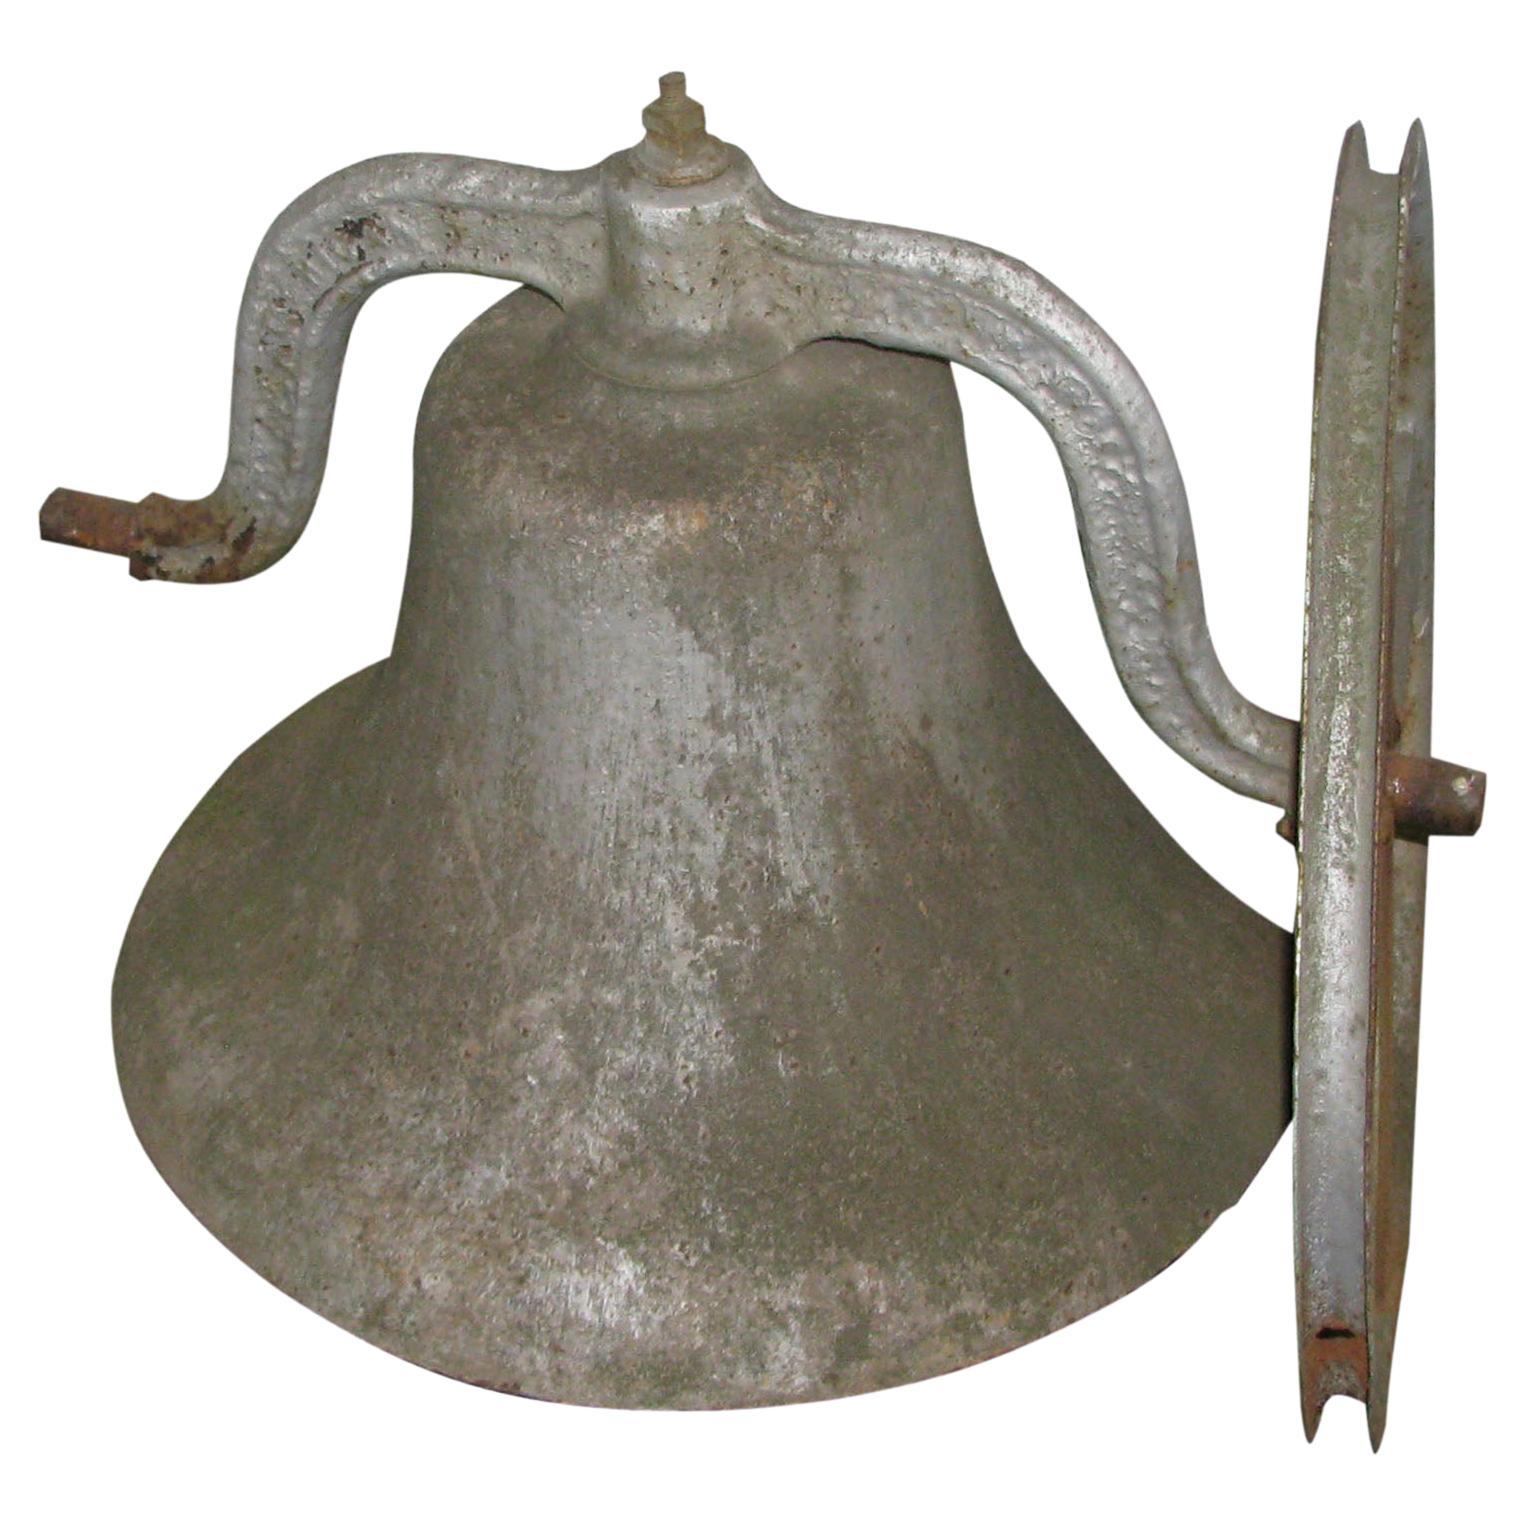 Mironey Ringing Hand Bell Cast Iron Hand Bell Call Vintage Hand Held Bell Service Tea Dinner Bell Game Bell for Calling Attention Pack of 2